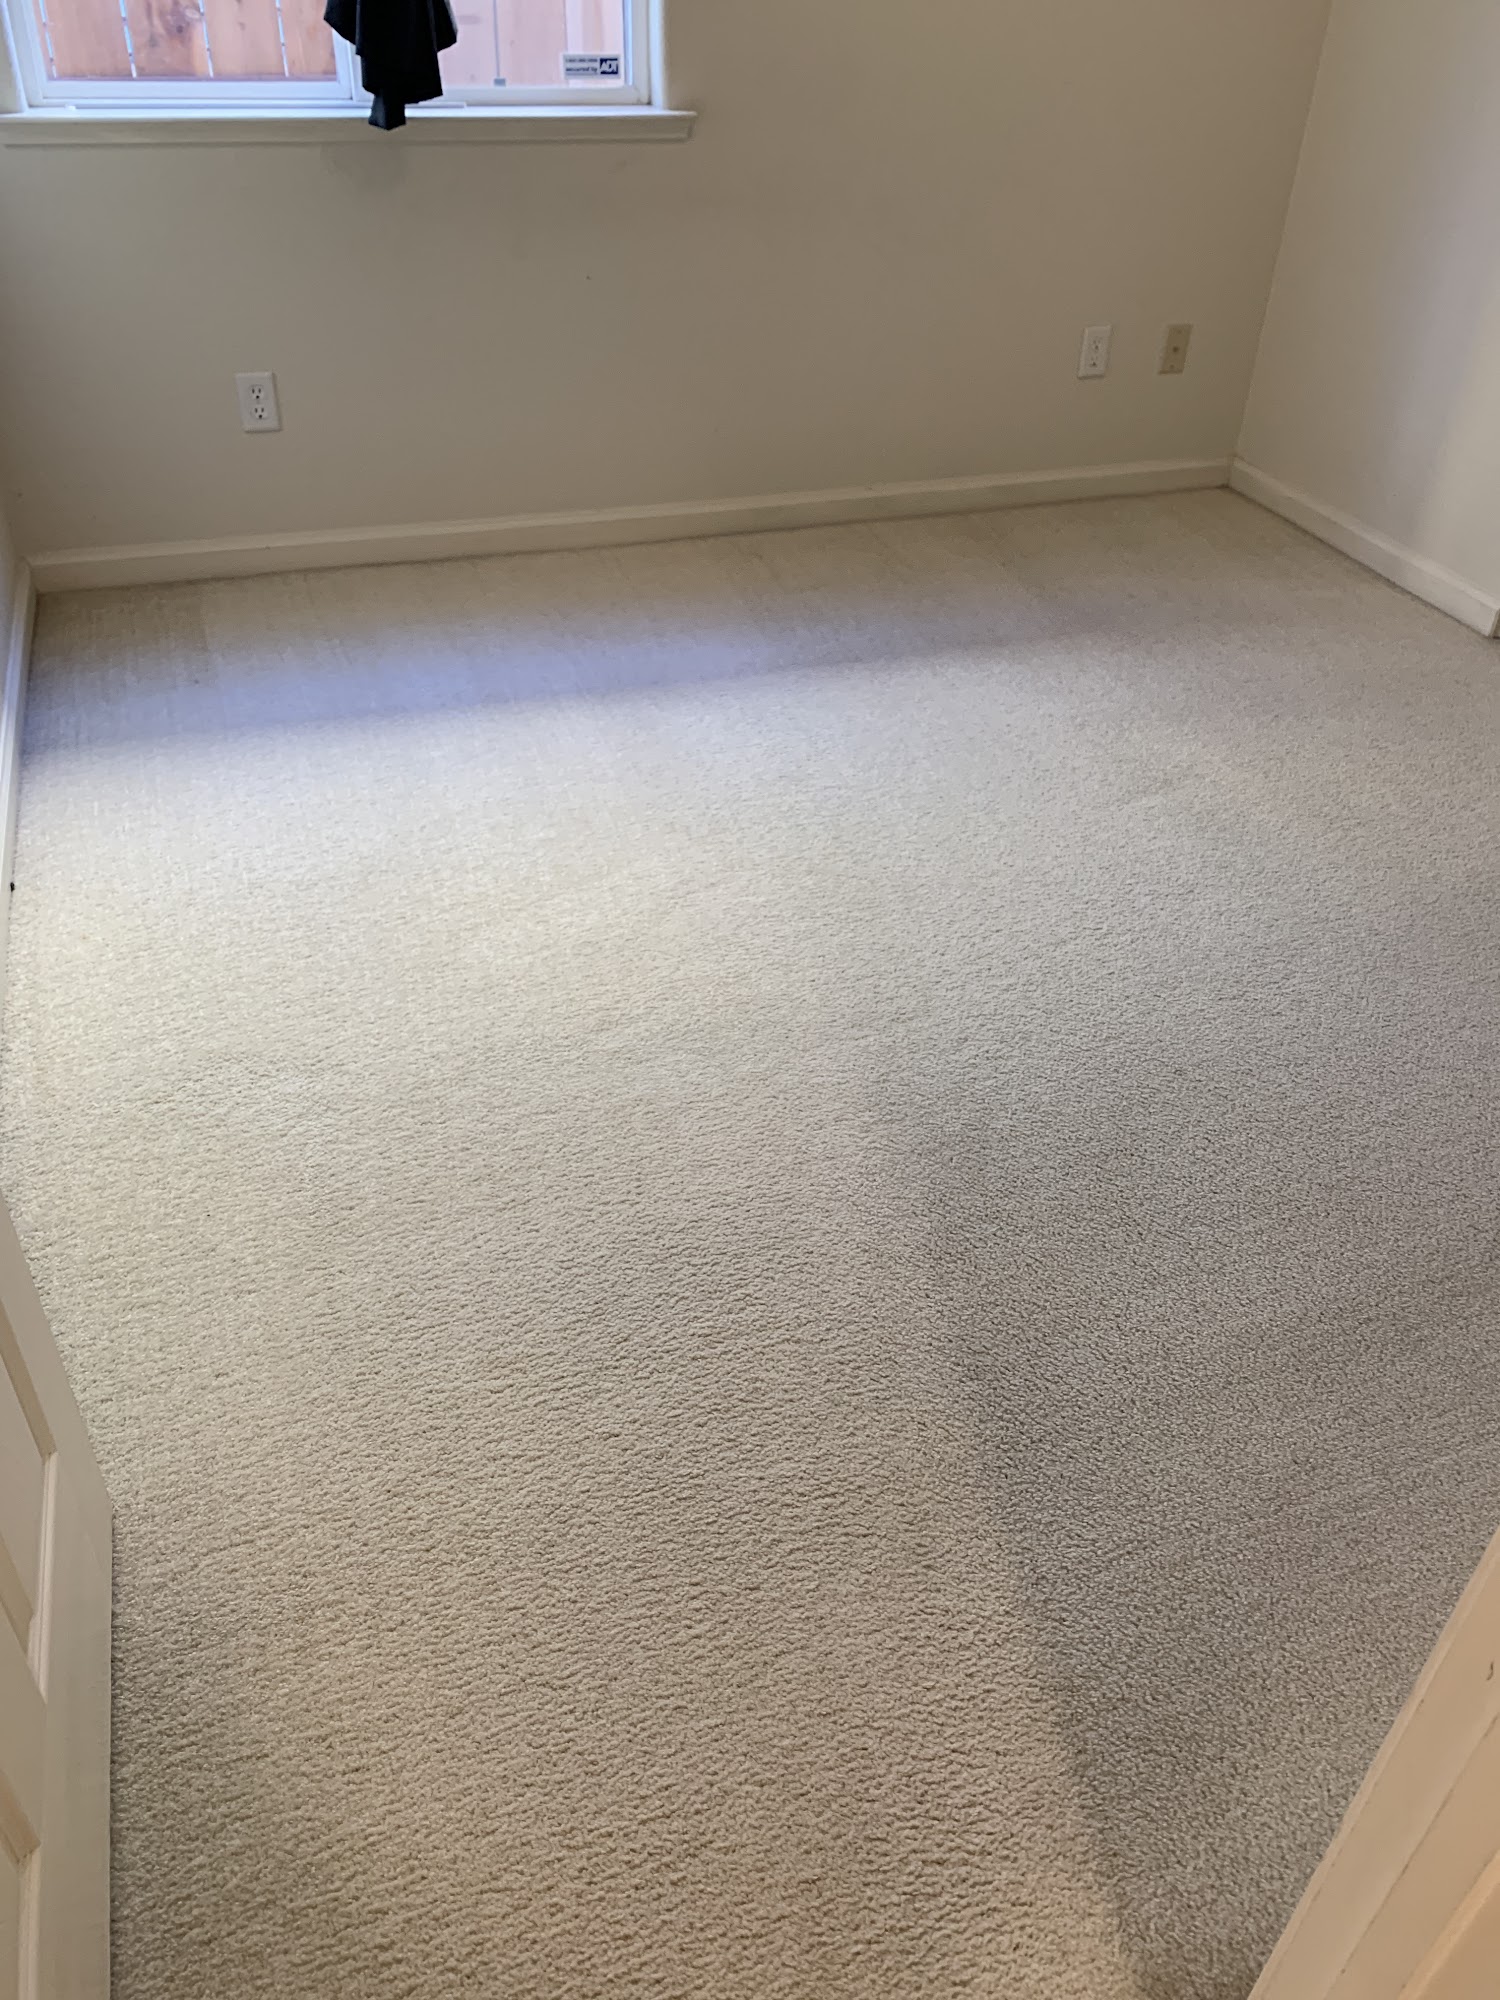 Delta Steam Carpet & Upholstery Cleaning 125 D'Arcy Pkwy, Lathrop California 95330